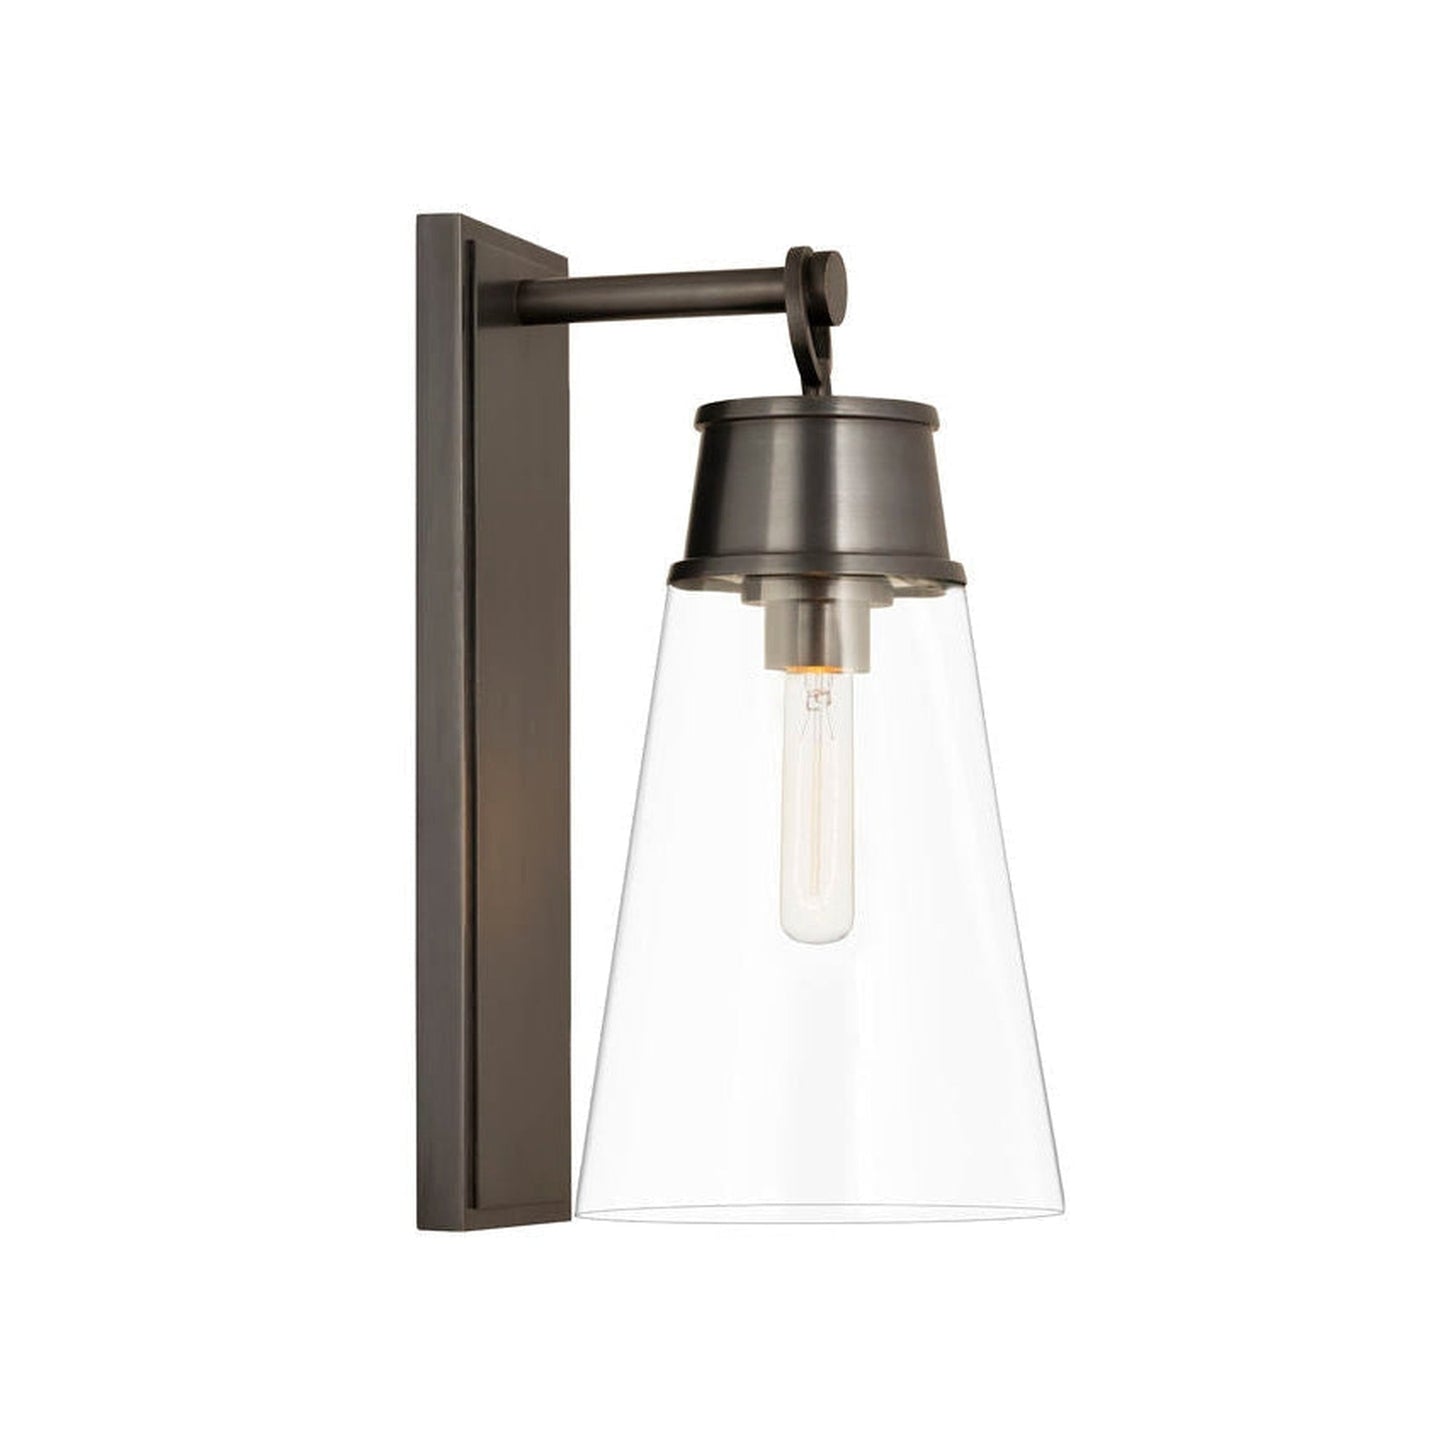 Z-Lite Wentworth 8" 1-Light Plated Bronze Wall Sconce With Clear Glass Shade